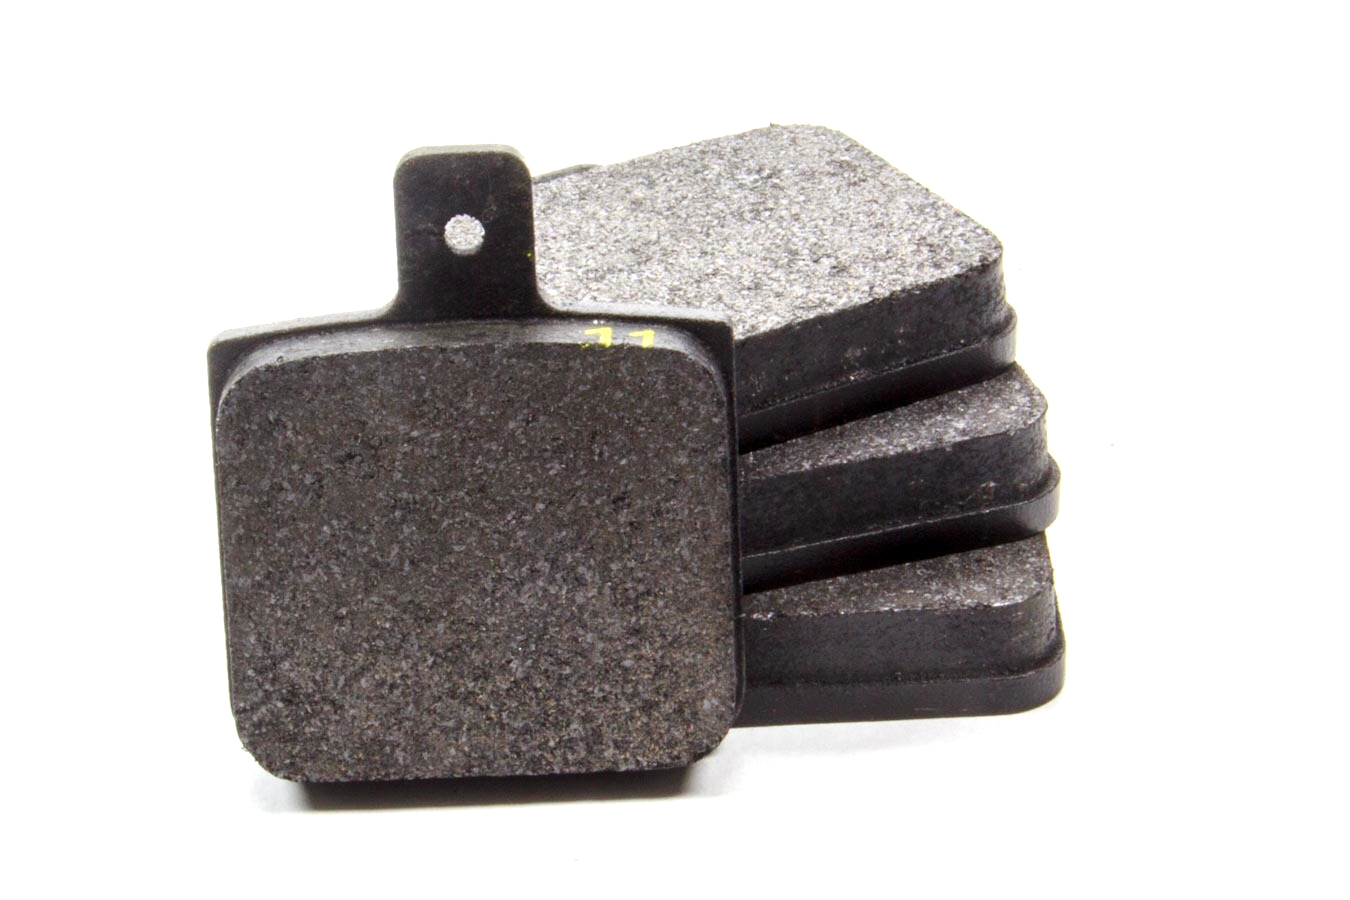 Performance Friction 7757.11.12.44 Brake Pads, 11 Compound, All Temperatures, Wilwood Dynalite Calipers, Set of 4